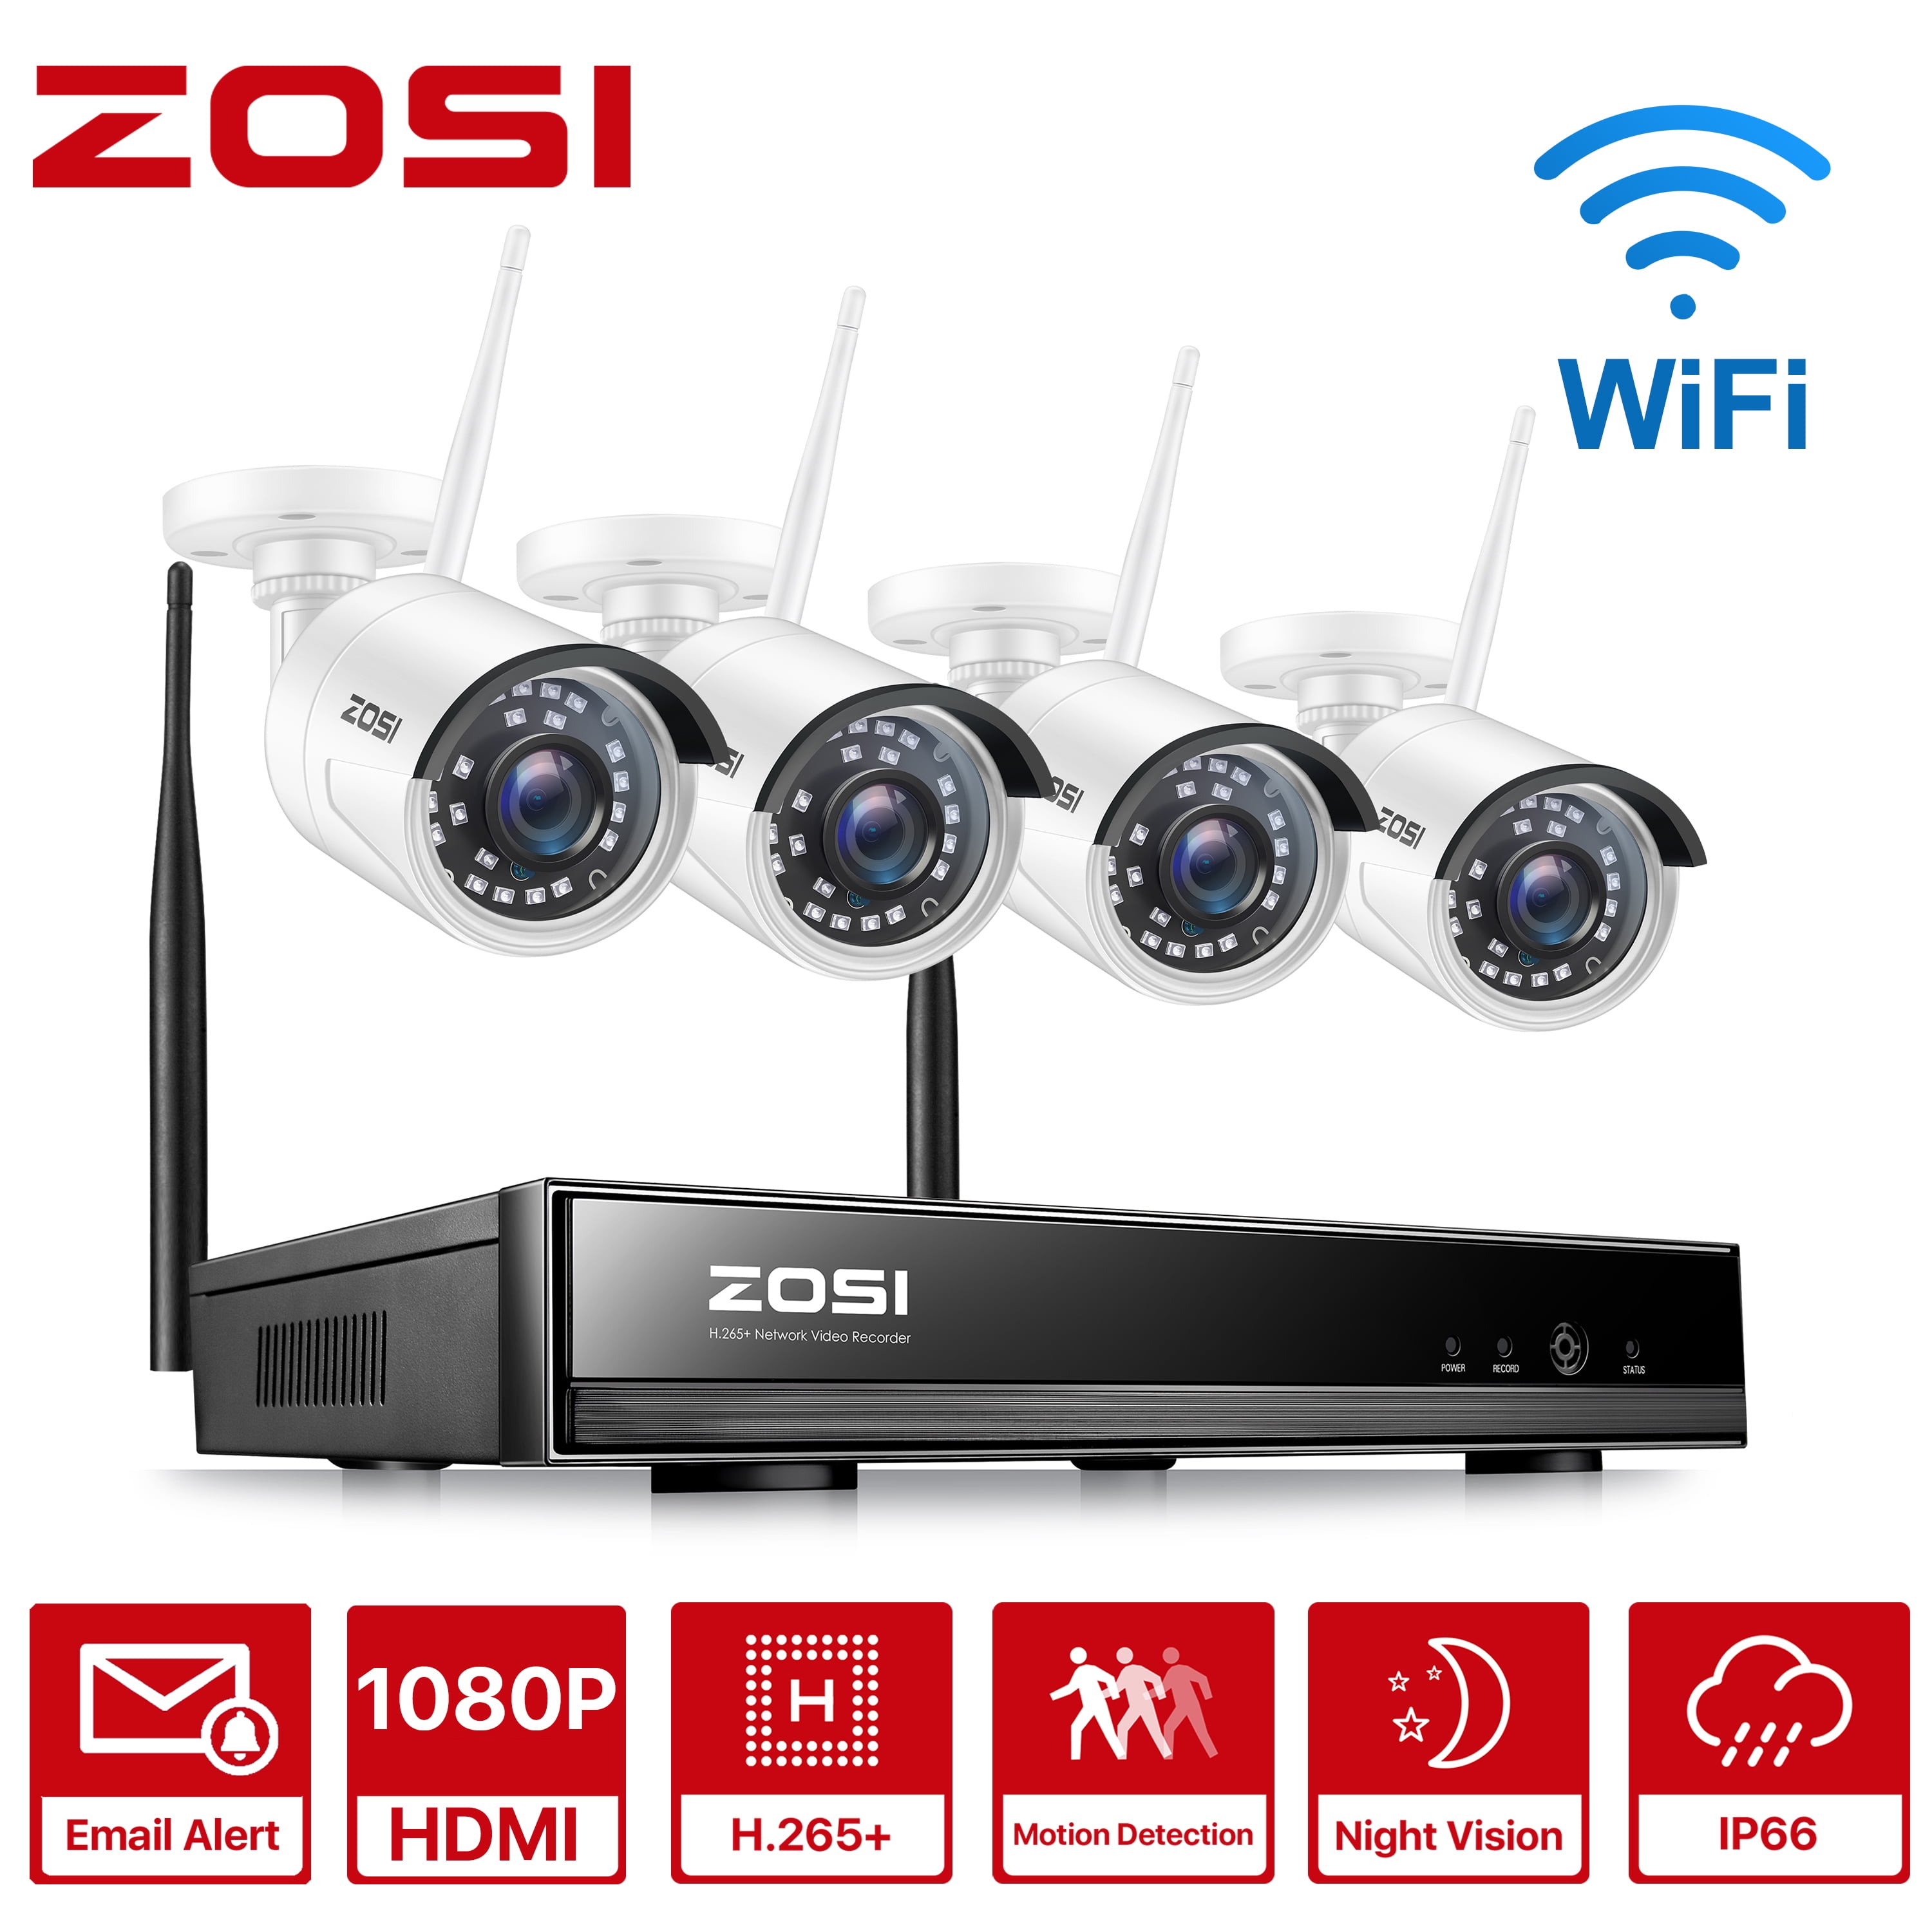 ZOSI 1080P HD 2.0MP Wireless IP Network Camera Weatherproof Outdoor Indoor Security Camera with 65ft IR Night Vision only Work with ZOSI NVR Network Video Recroder System 